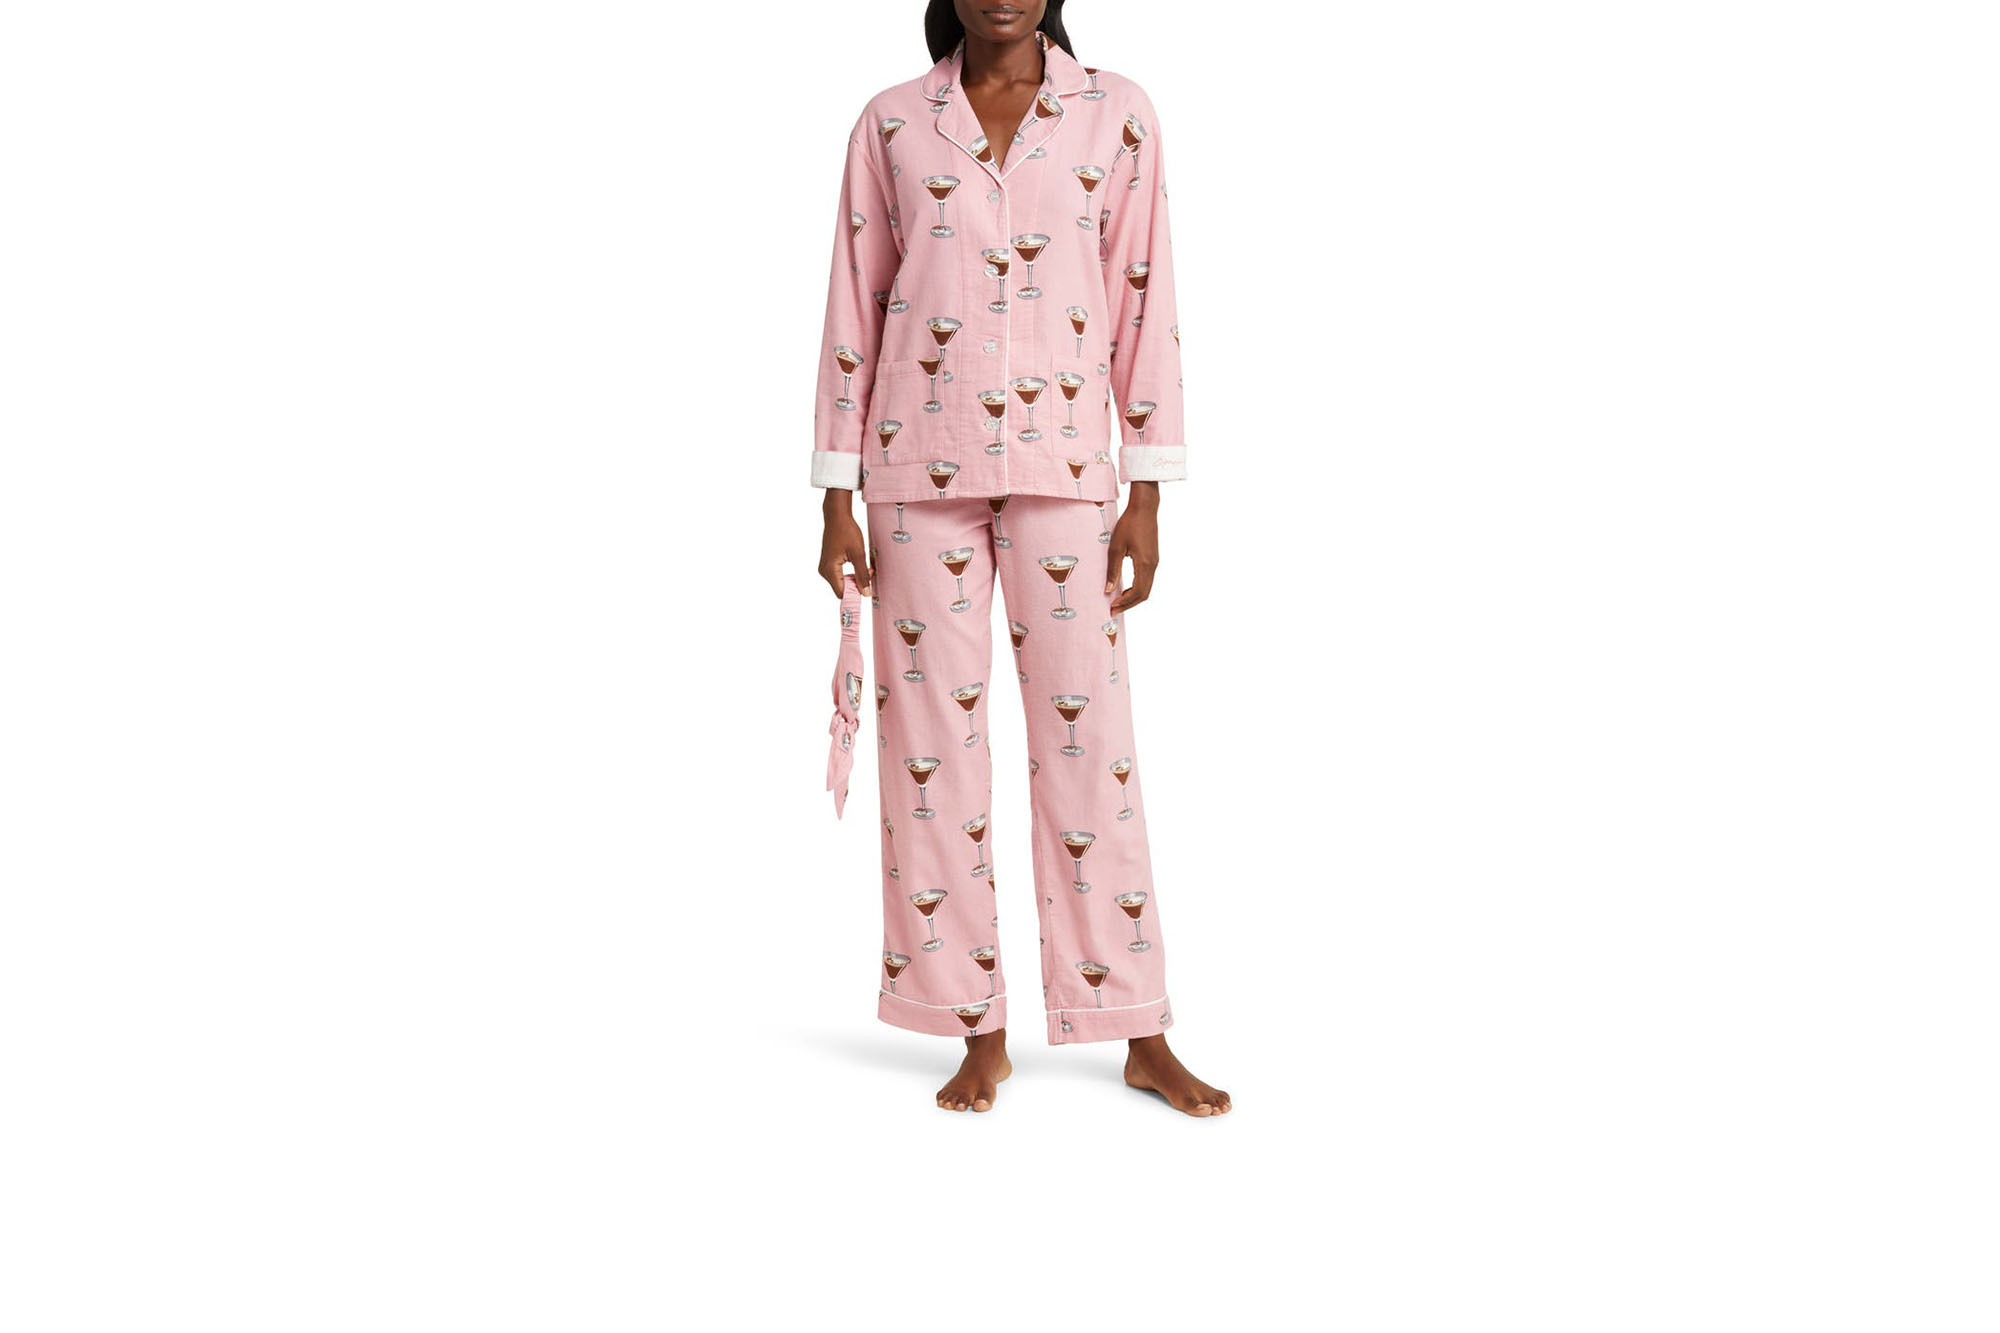 Get Your Sweetest Dreams in These Cozy-Chic Flannel Pajamas